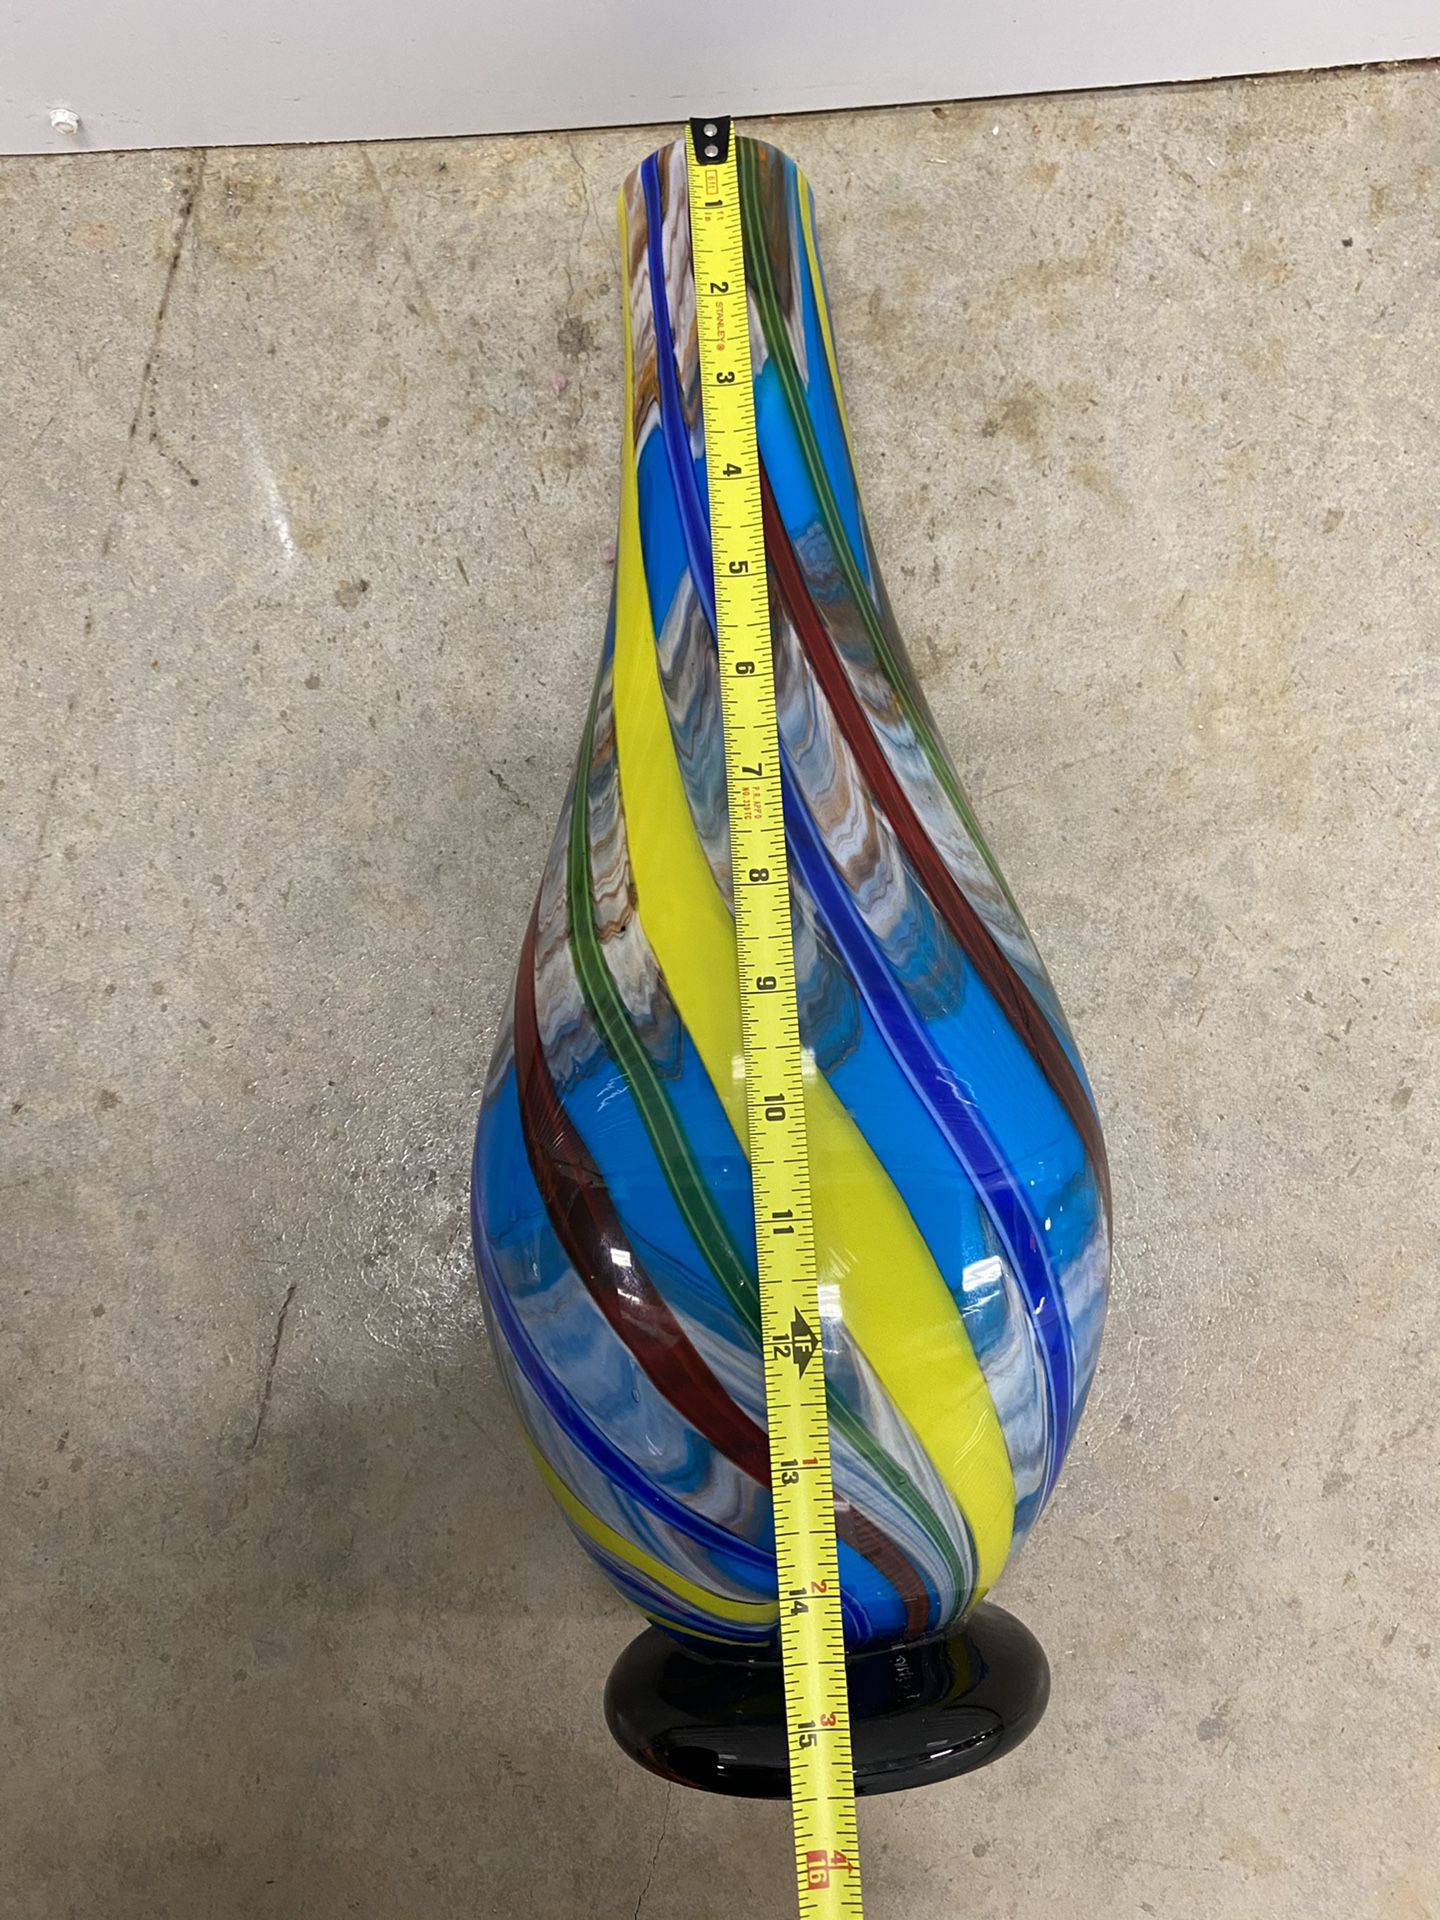 Abstract Glass Vase